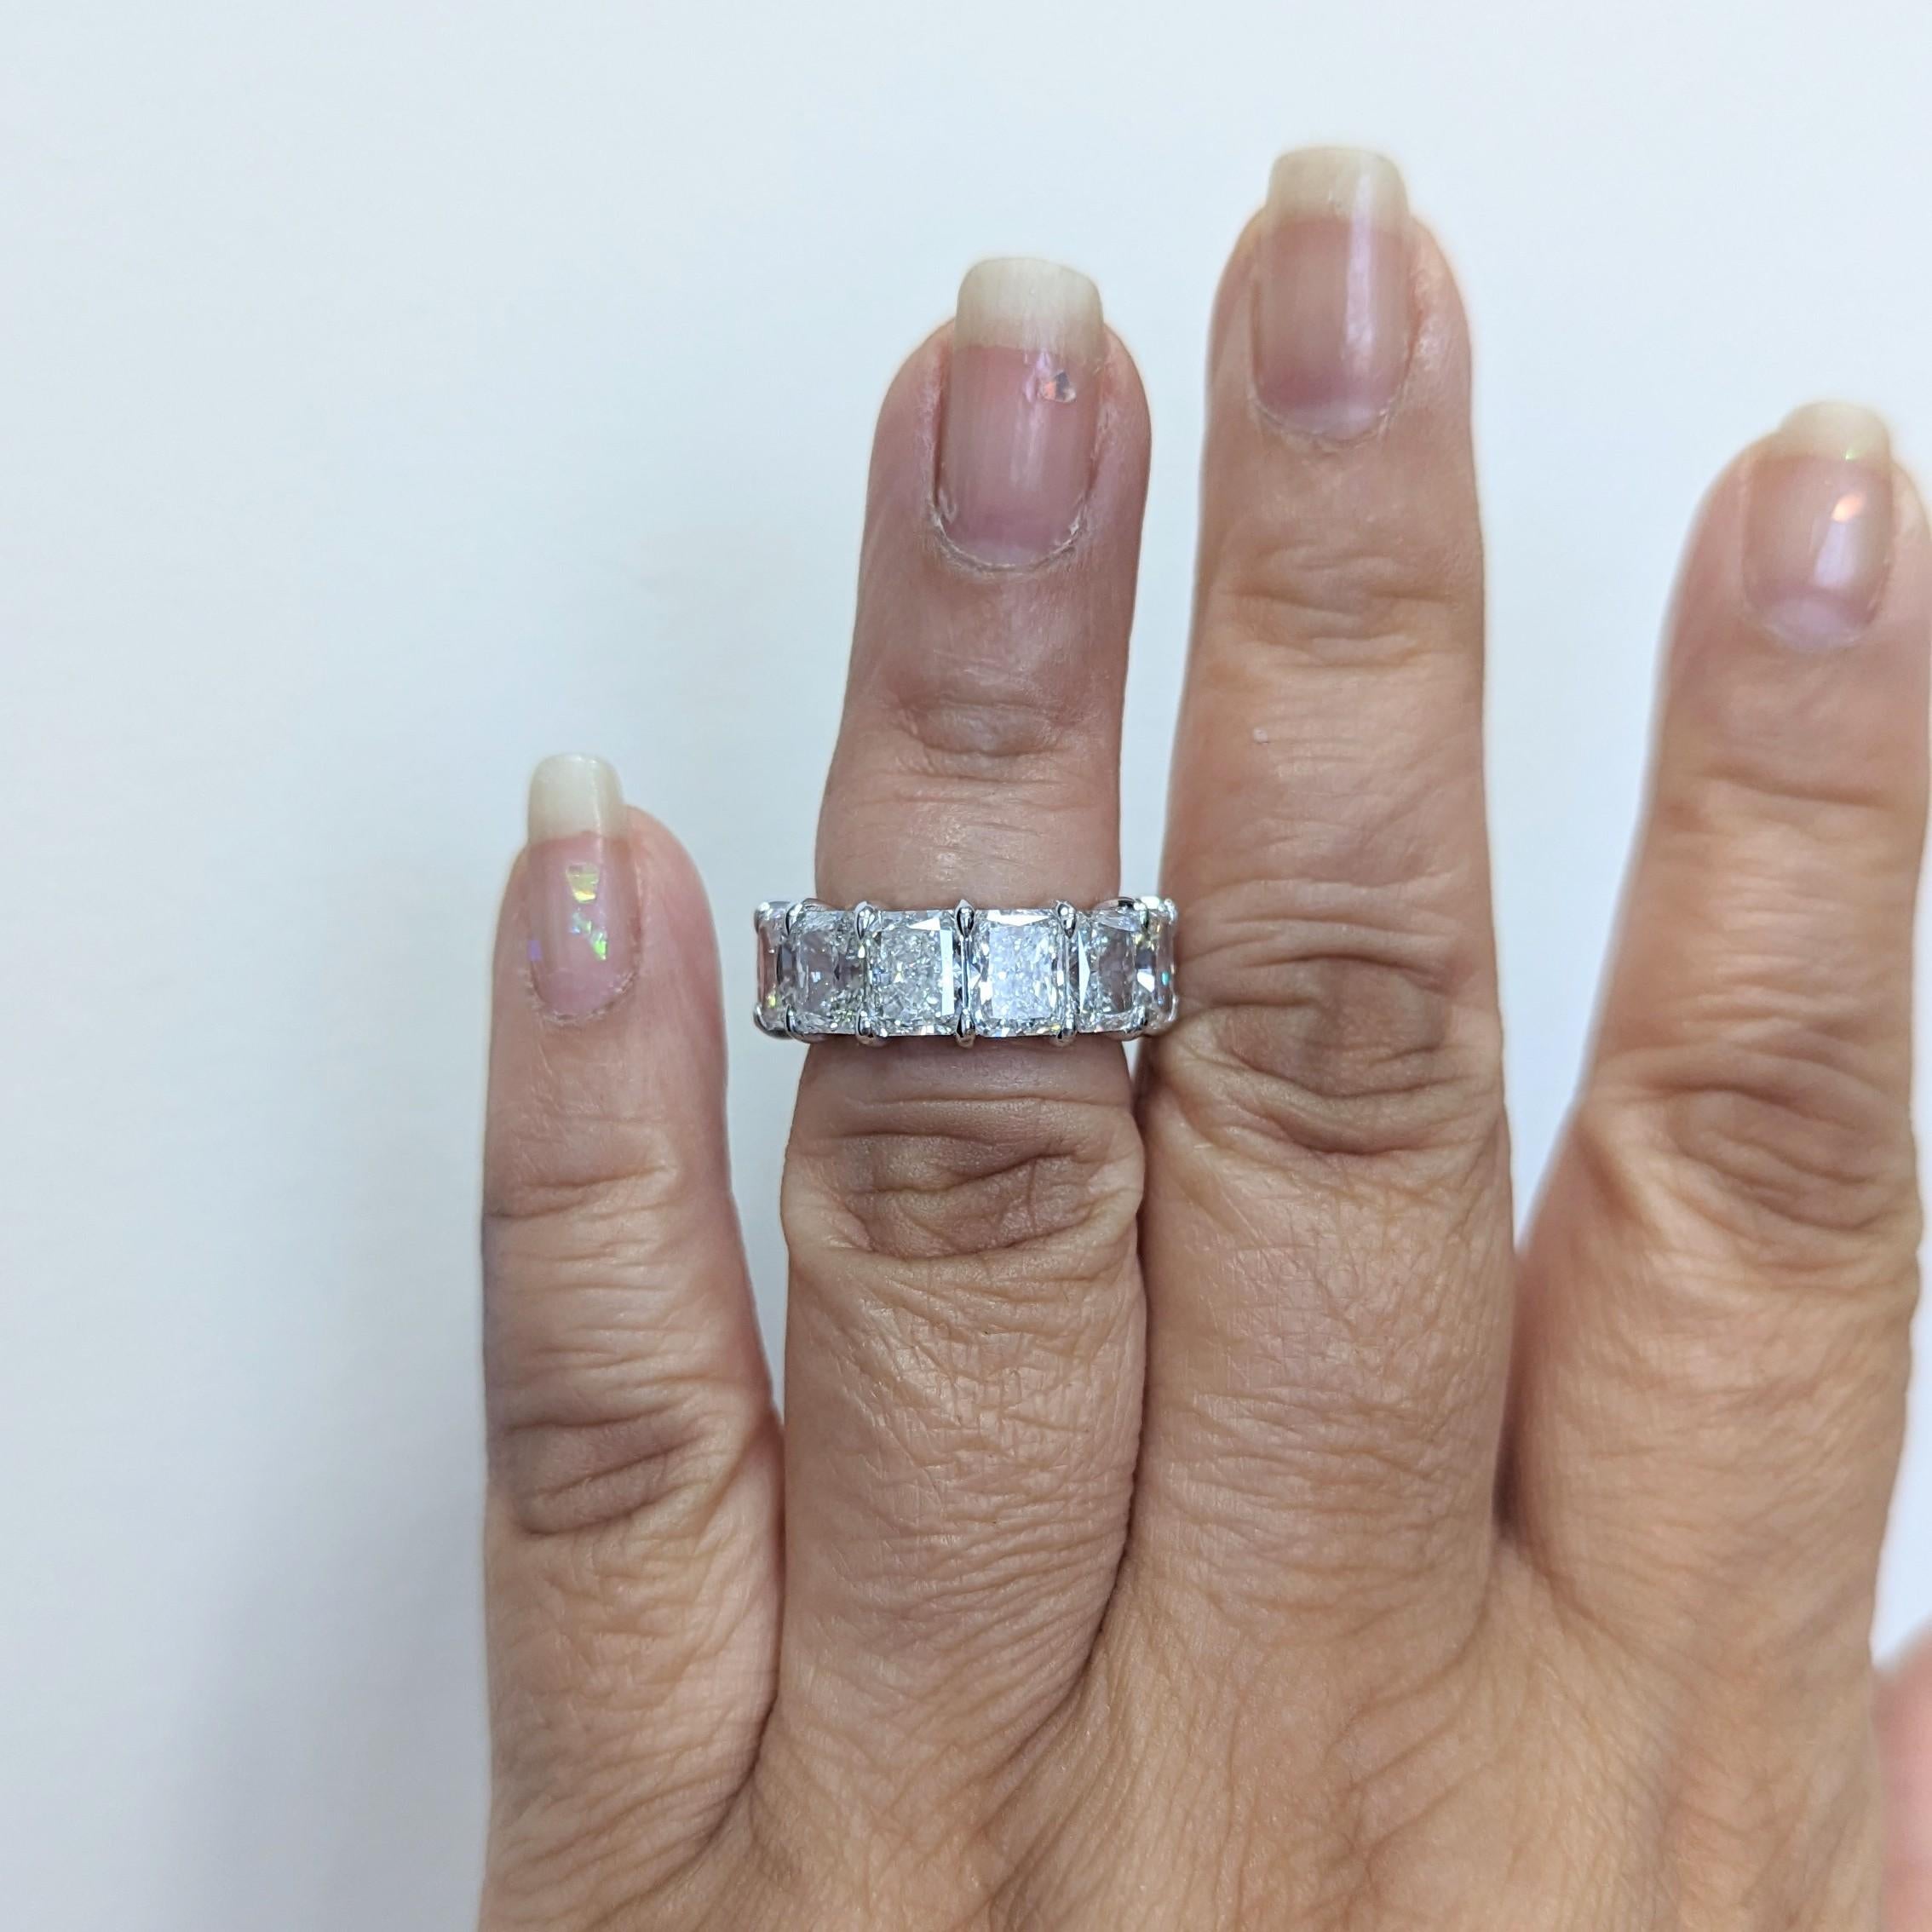 Beautiful 13.07 ct. GHI SI1-SI2 white diamond radiant cuts.  Handmade in 18k white gold.  Total of 13 stones.  GIA certificates included.  Ring size 6.